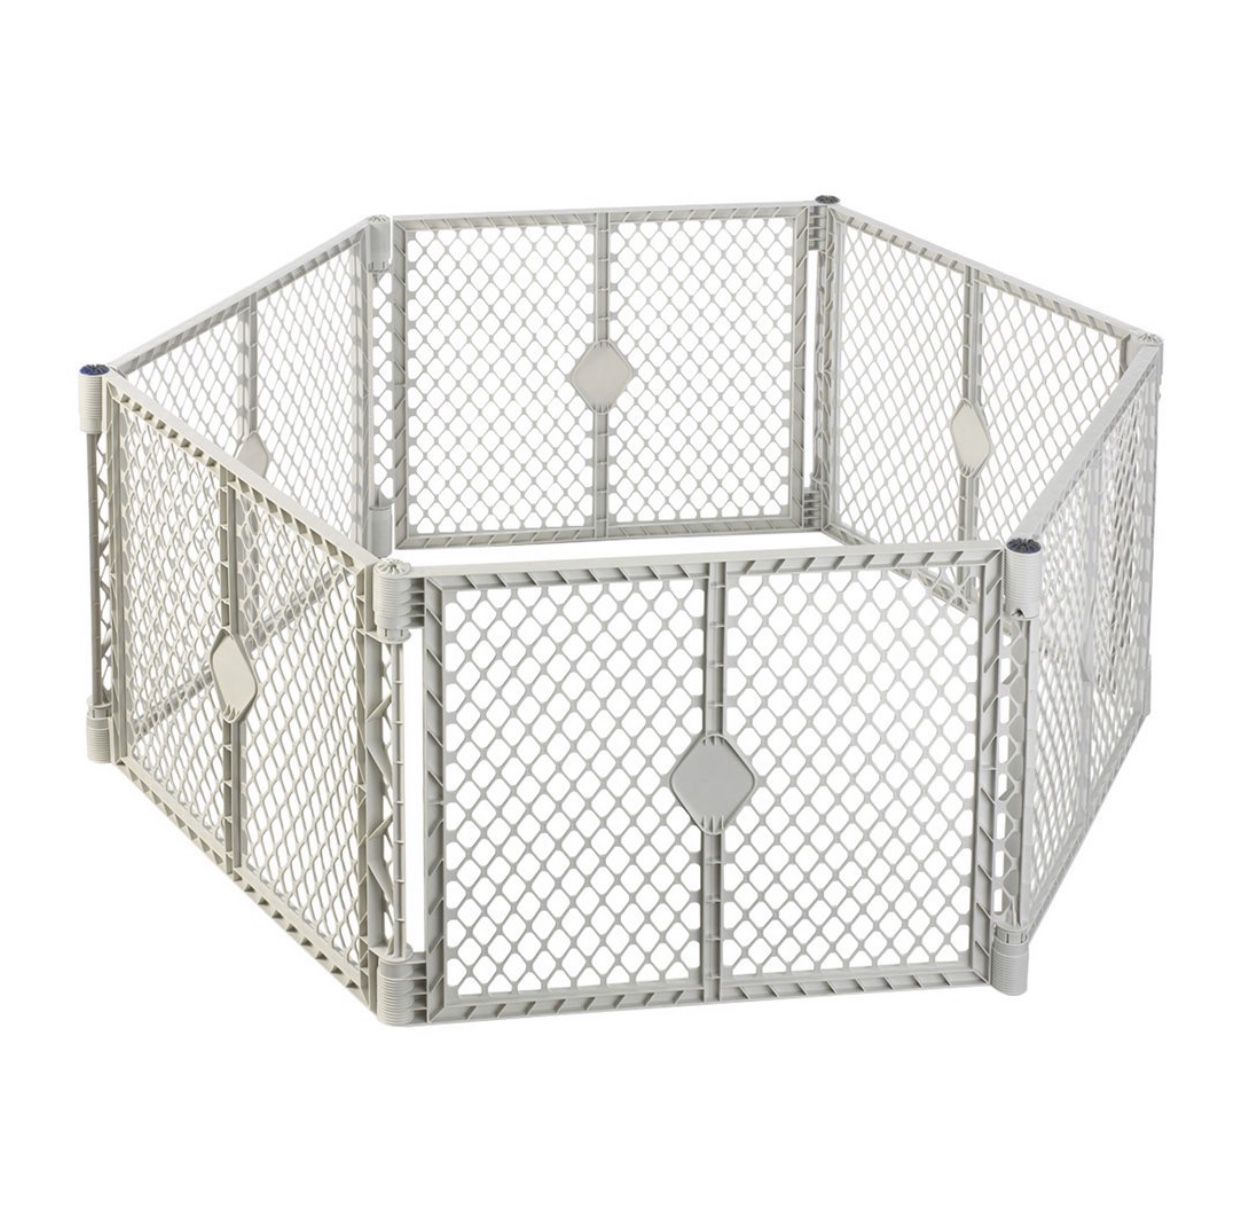 New Northstates Toddleroo Superyard play space play yard gate area Indoor/Outdoor 6-Panel SUMMERLIN